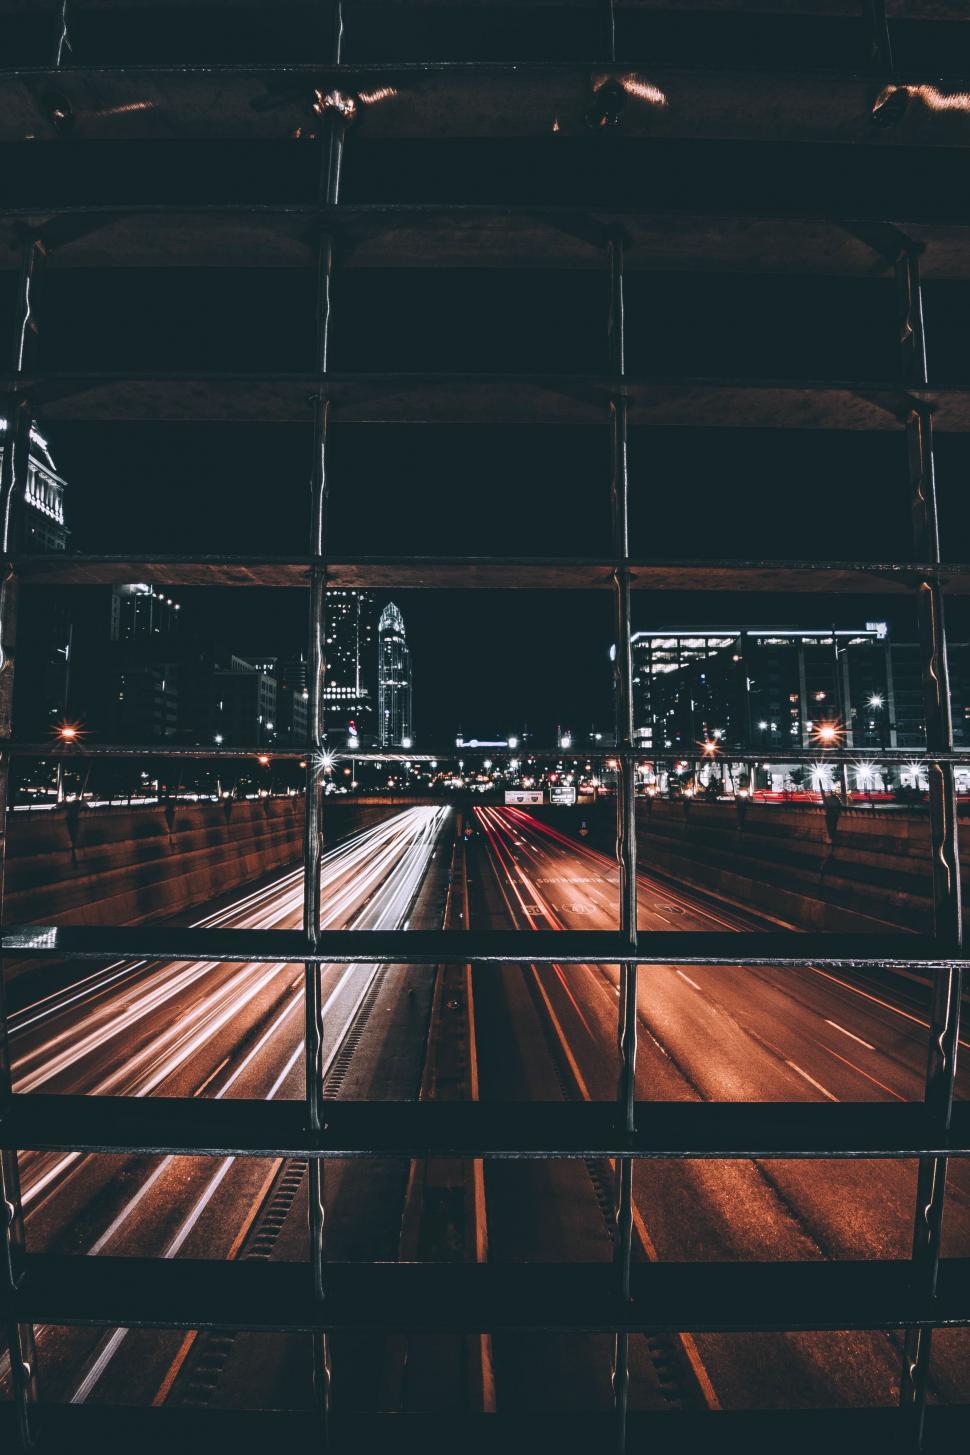 Free Image of Urban scene seen through a fence 